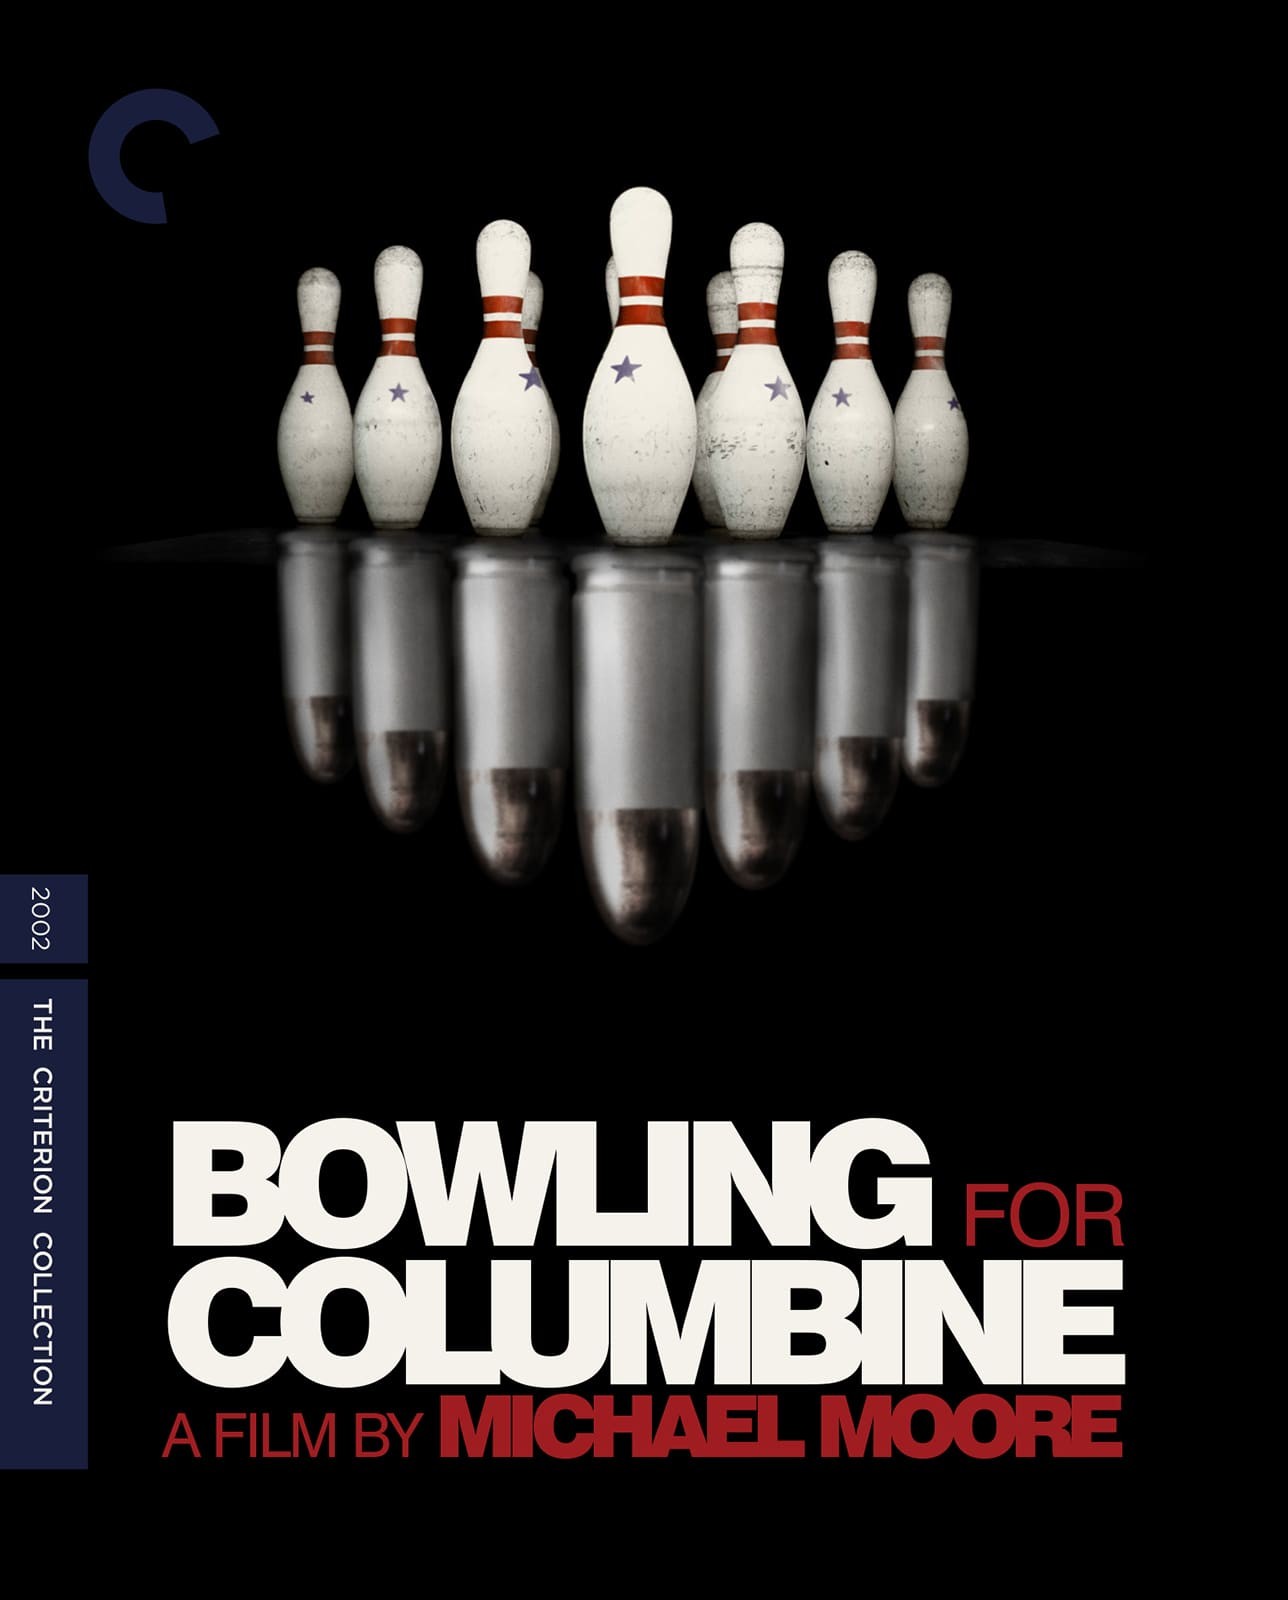 Criterion Confessions BOWLING FOR COLUMBINE pic